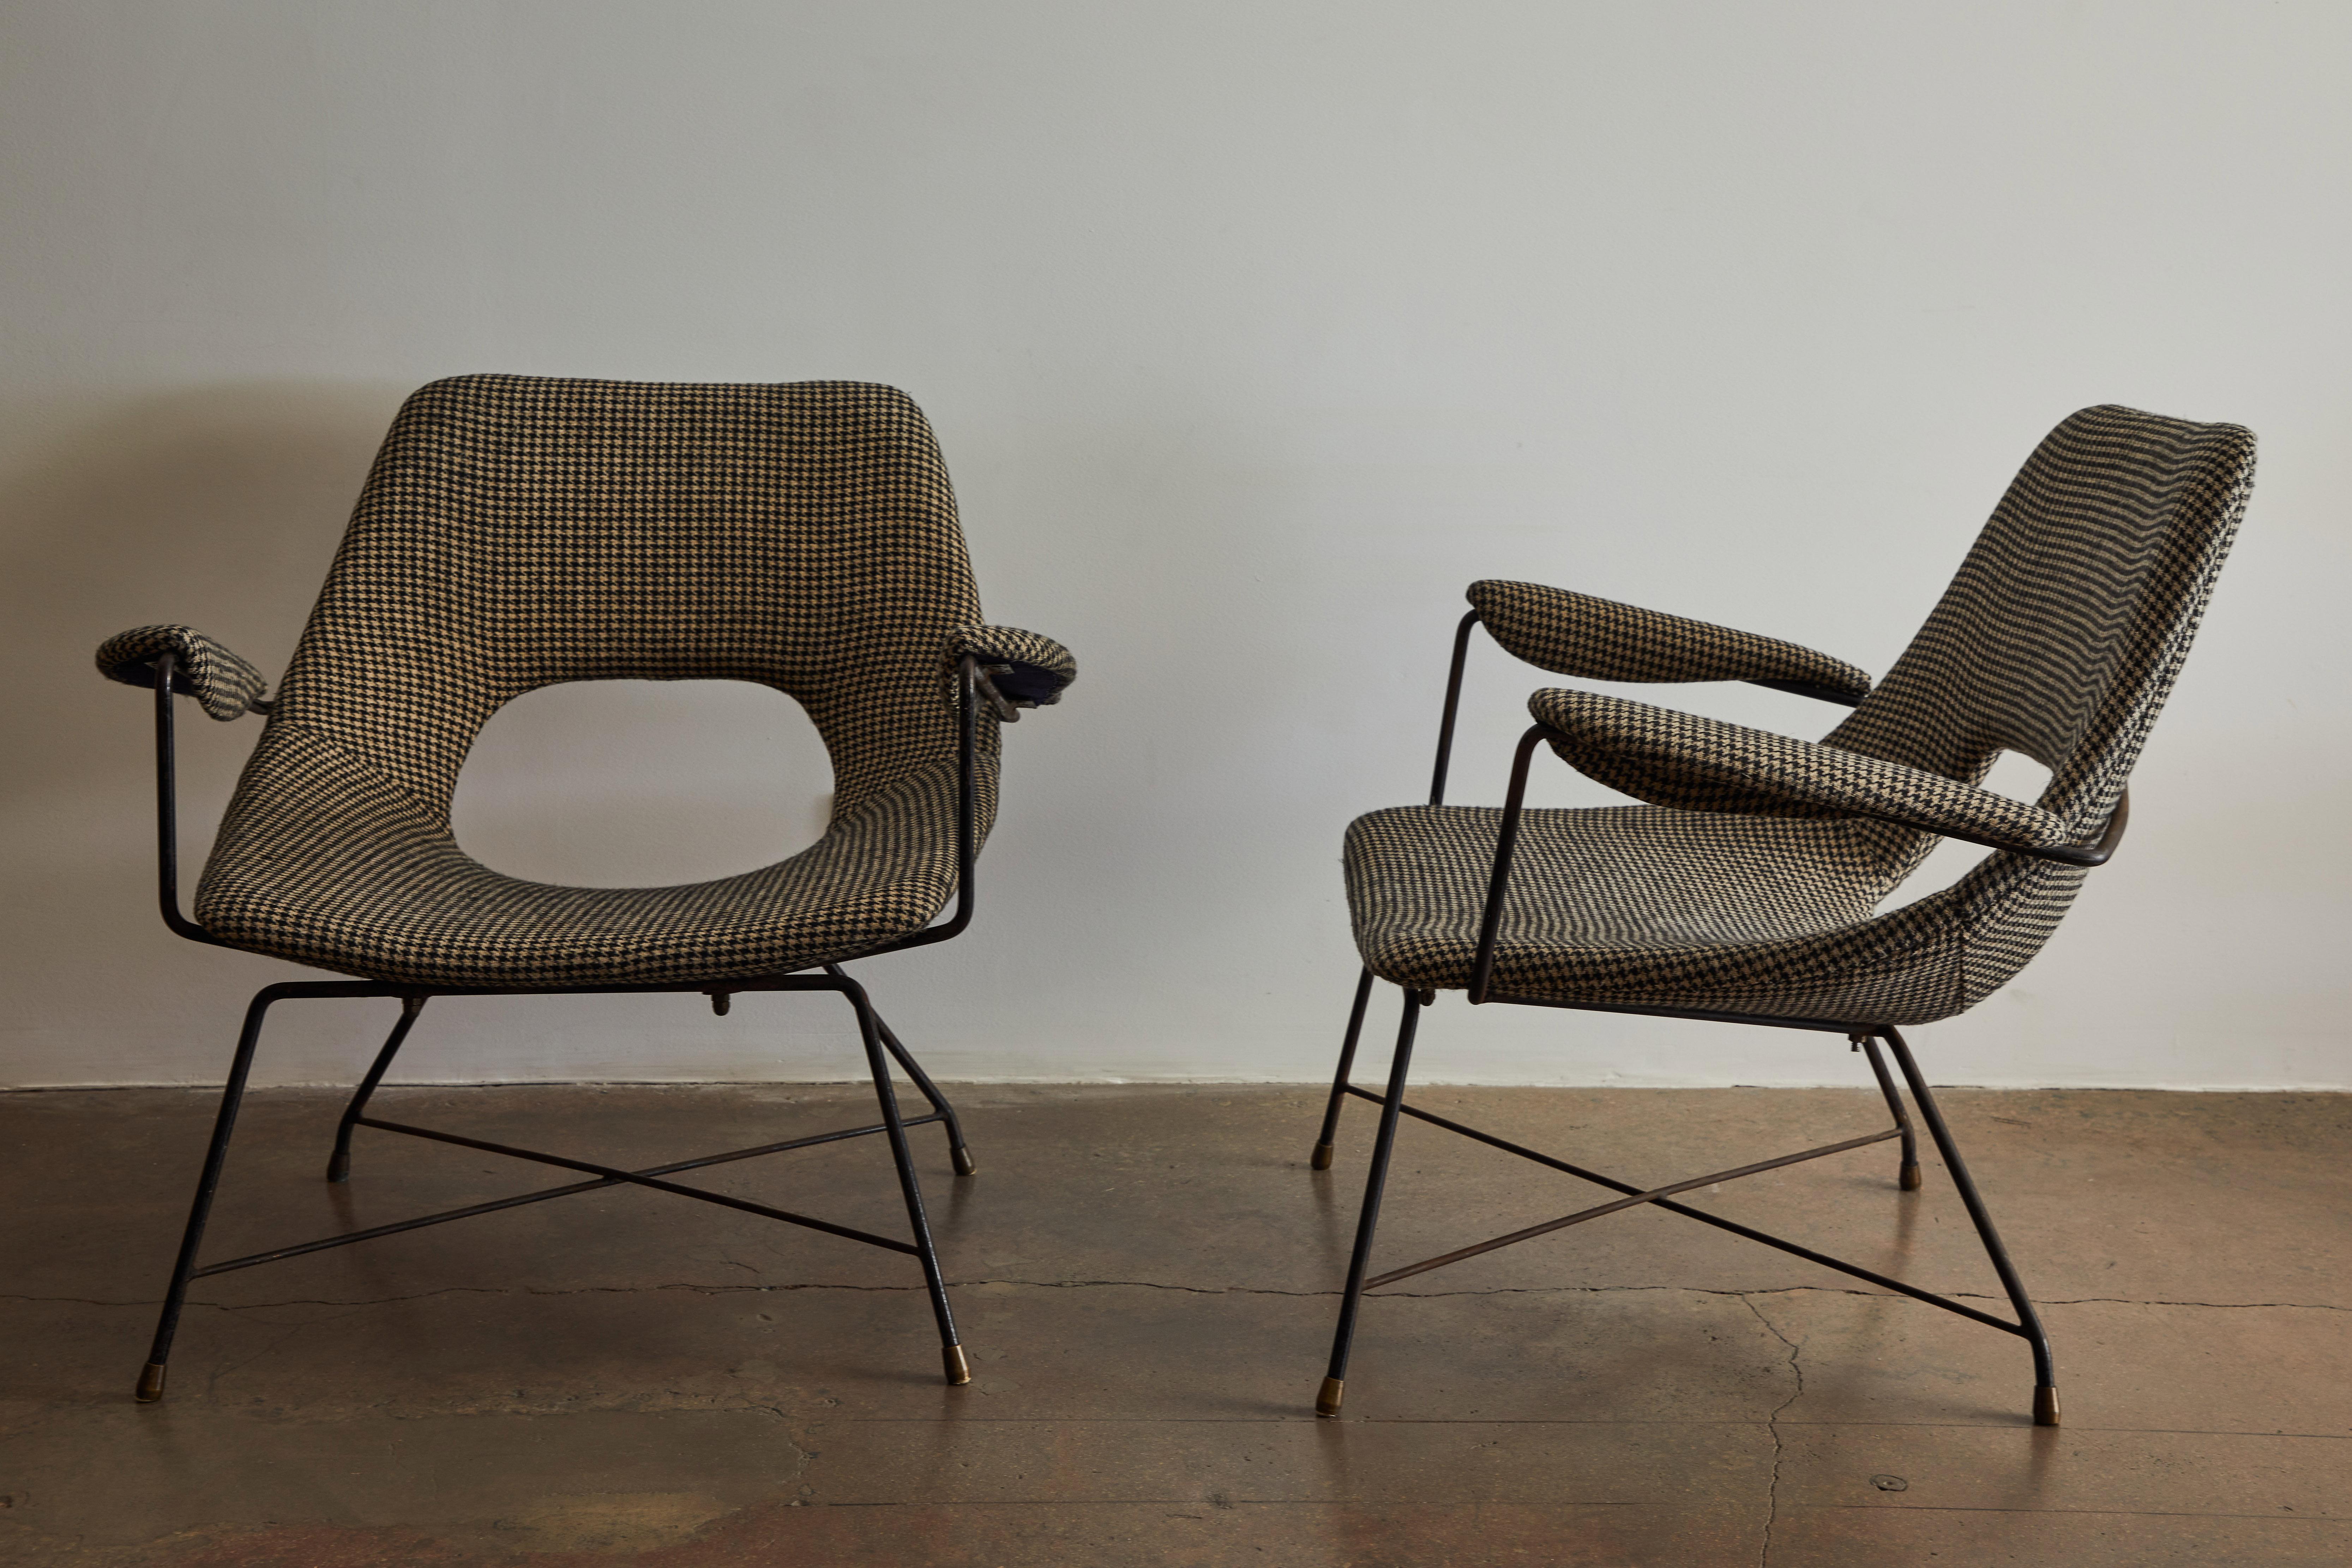 Pair of lounge chairs by Augusto Bozzi for Saporiti Italia. Reupholstered in Irish houndstooth linen. Made in Italy, circa 1950s.

Decal manufacturer's labels to frame ‘Fratelli Saporiti (Italia)’ and ‘Made in Italy‘. 

Literature: Undicesima